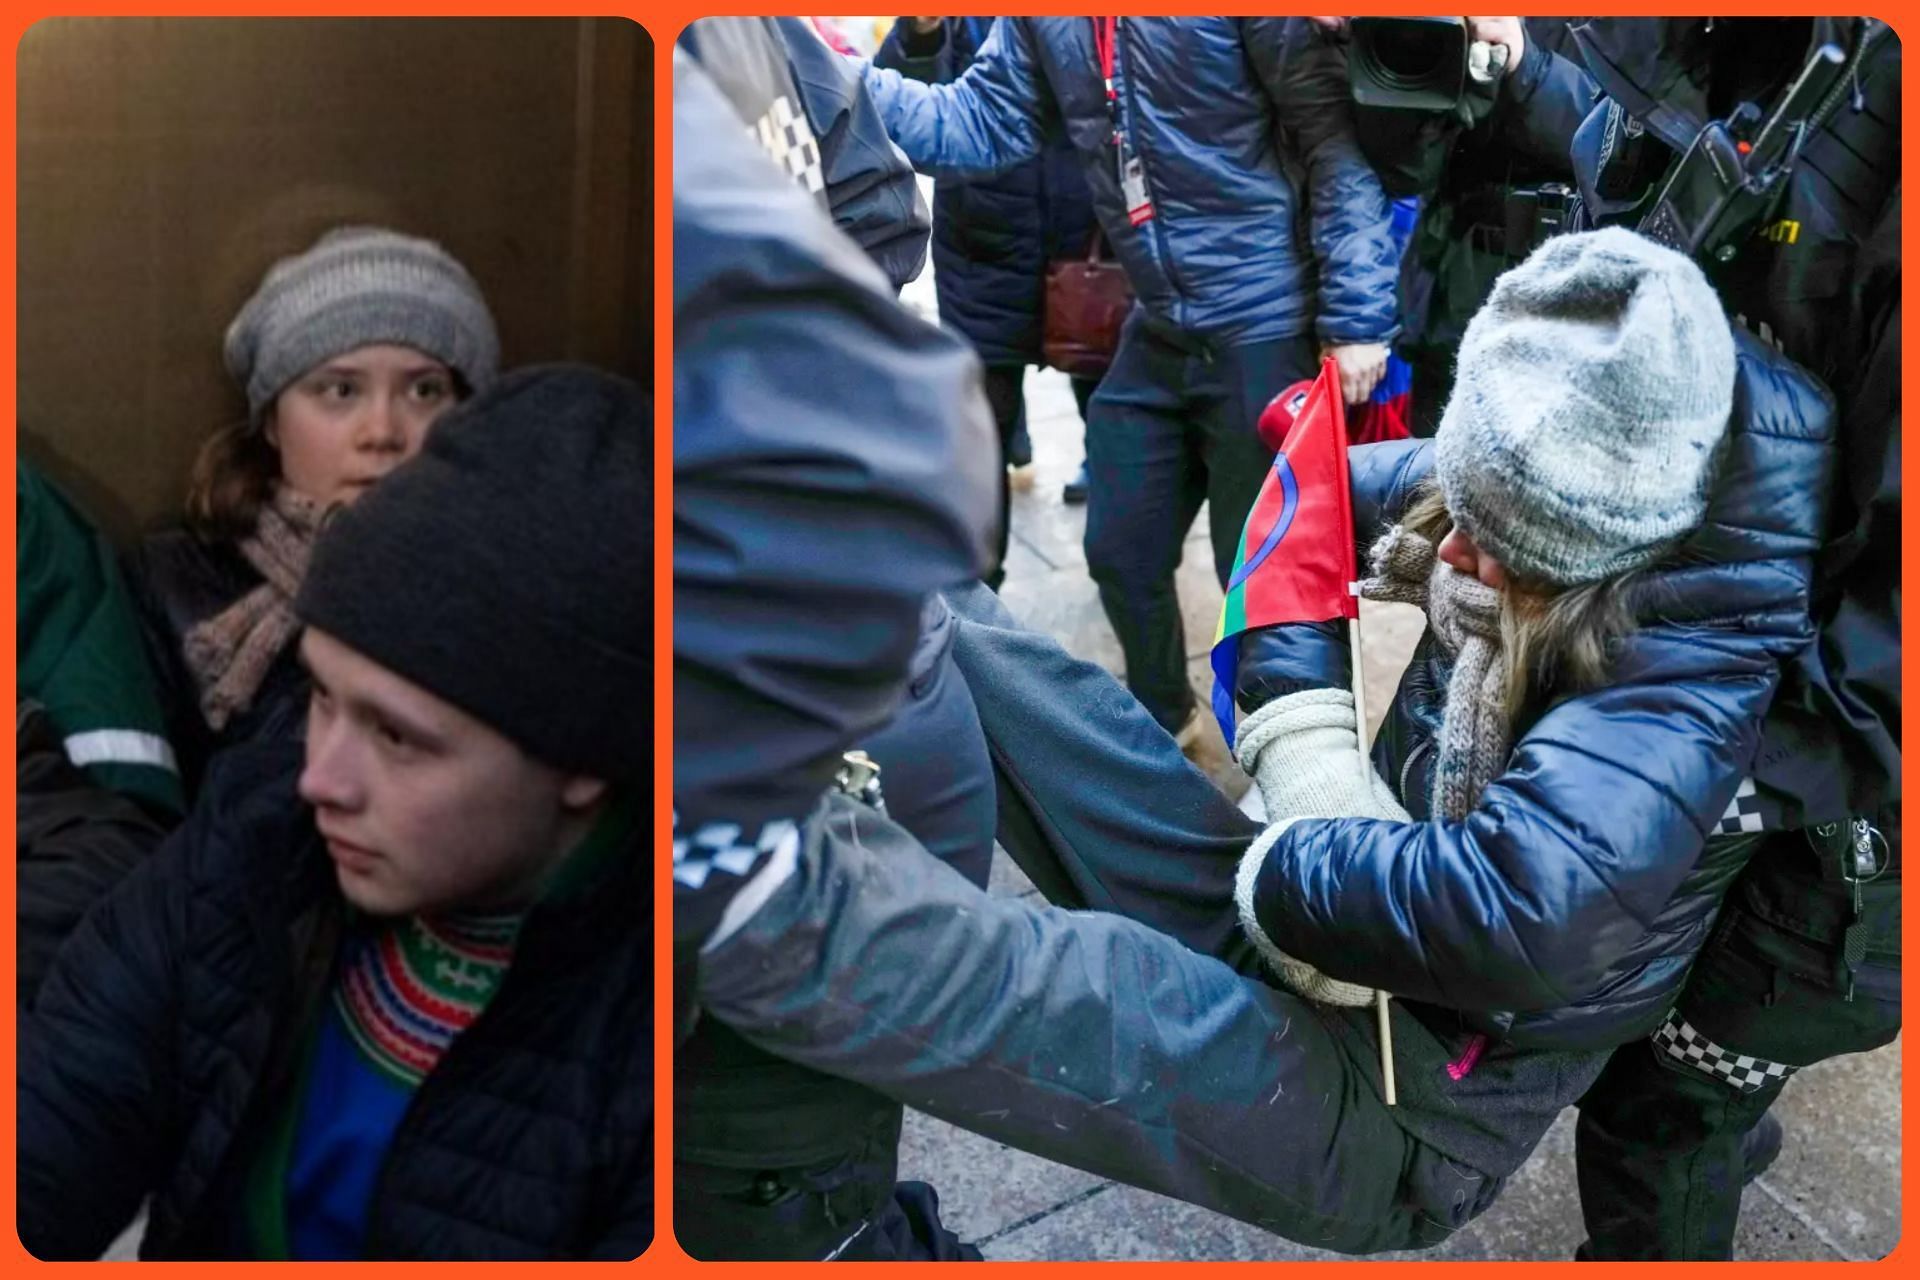 Greta Thunberg got clicked while getting detained by Norwegian police (Image via Instagram/nsr_nuorat and Alf Simensen/NTB/via Reuters)